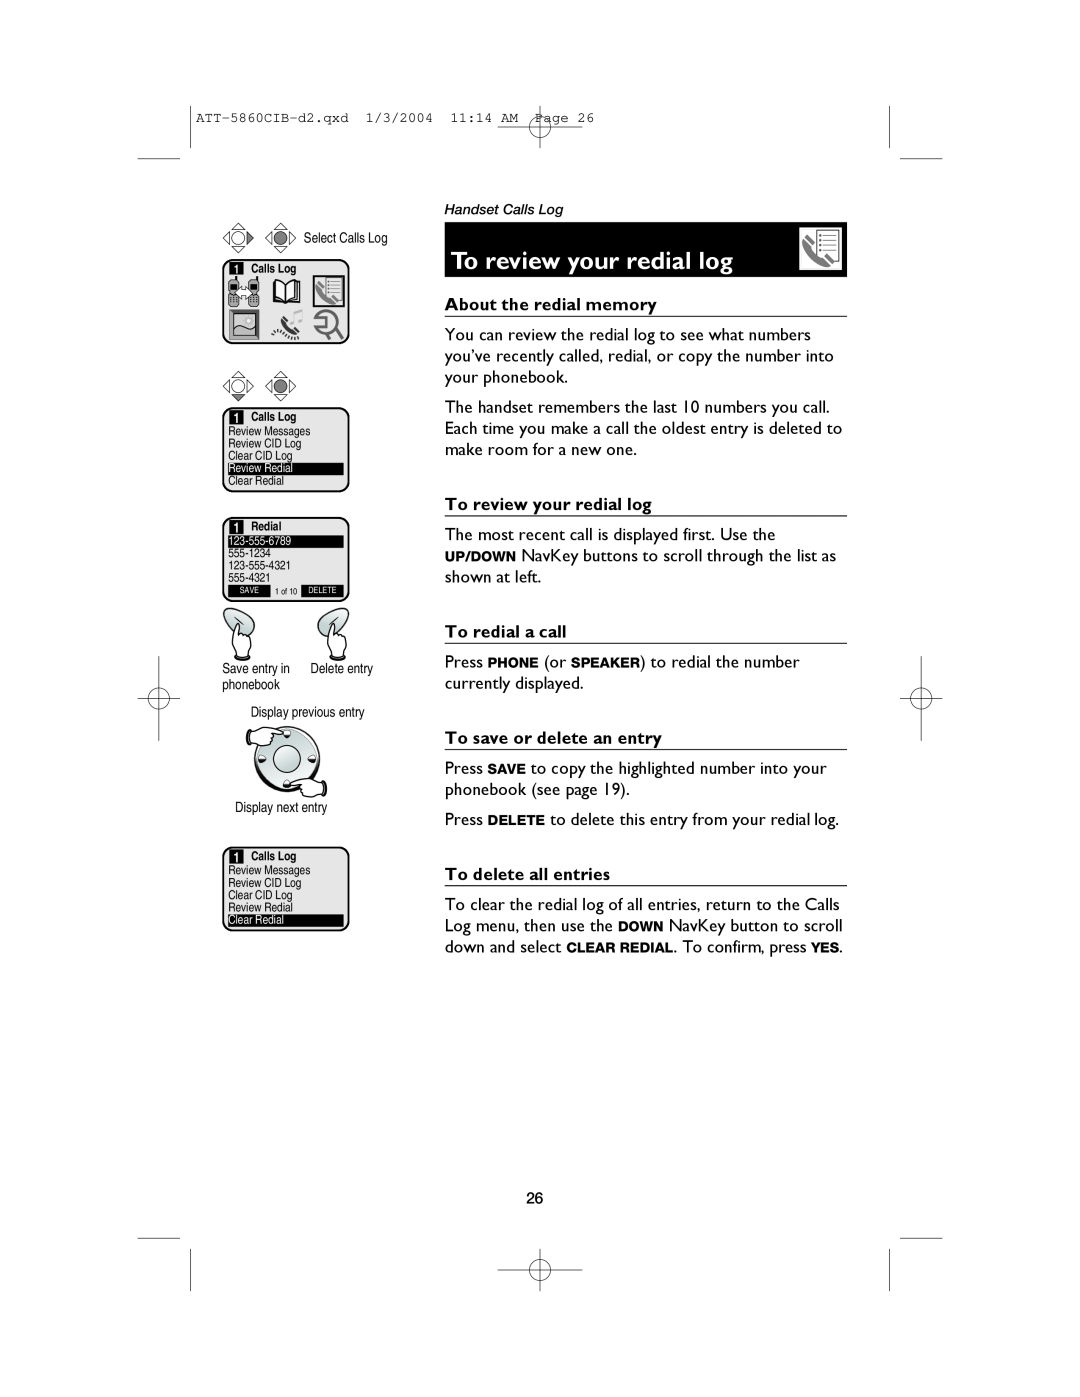 AT&T E5860 user manual To review your redial log, About the redial memory, To redial a call, To save or delete an entry 